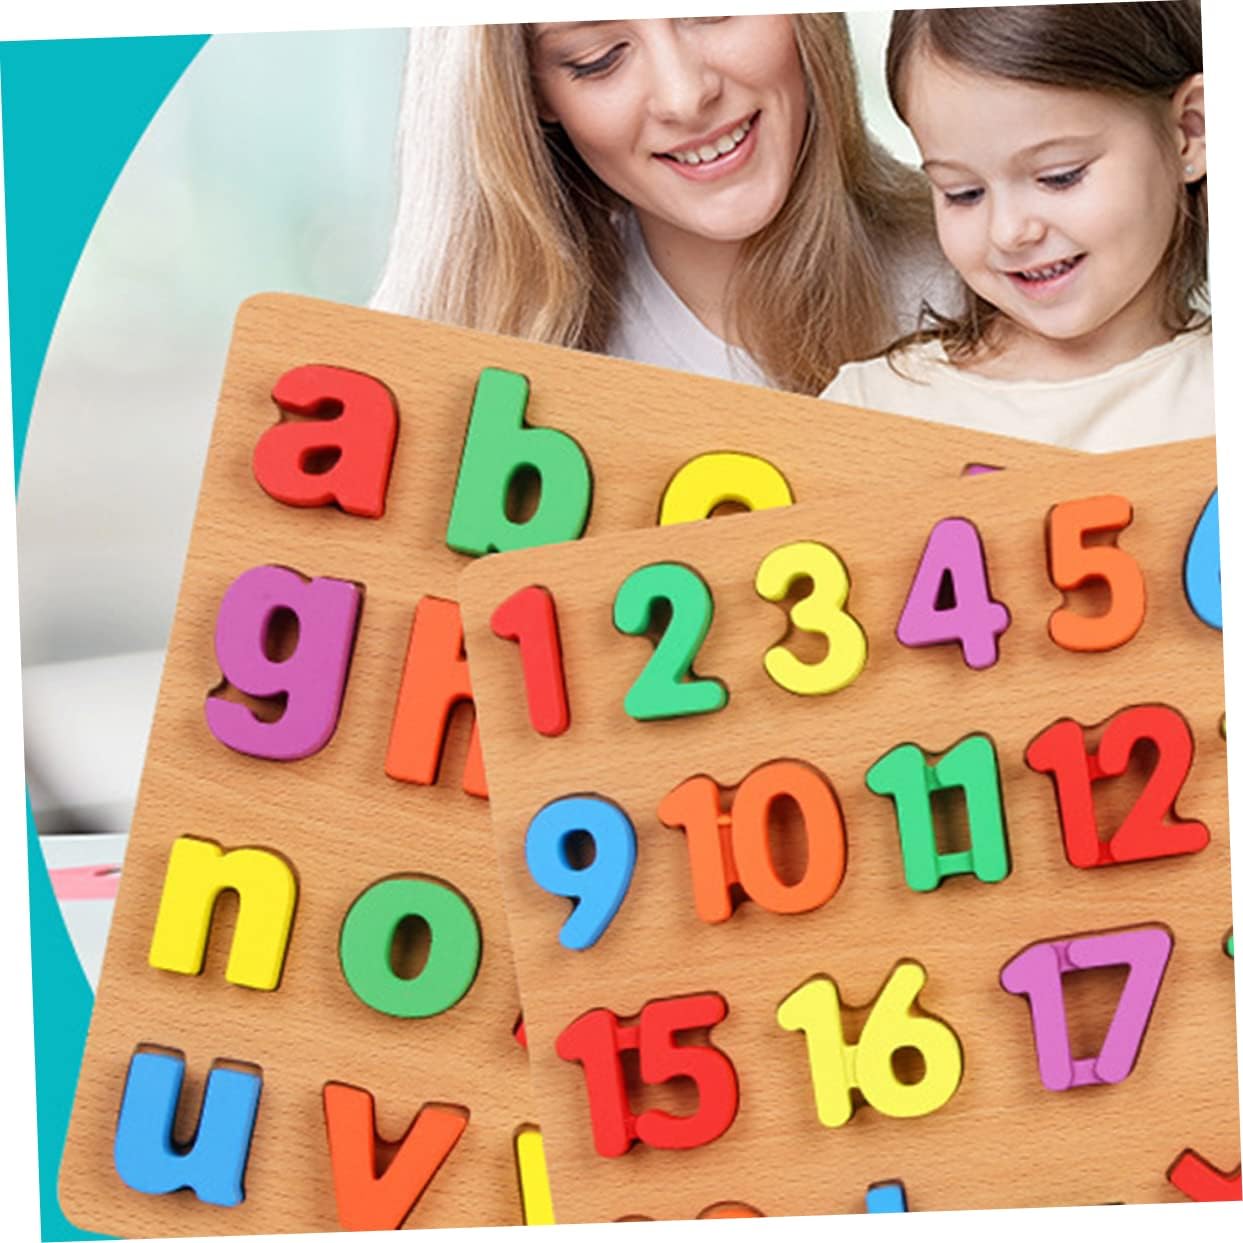 Wooden Toys Toys 2pcs Educational Letters Puzzle Hand Wood Digital Numbers Gripping Grasping Number Board Blocks Wooden Toy Mosaic Building Toys - Cognitive Children's Toys Wooden Puzzles